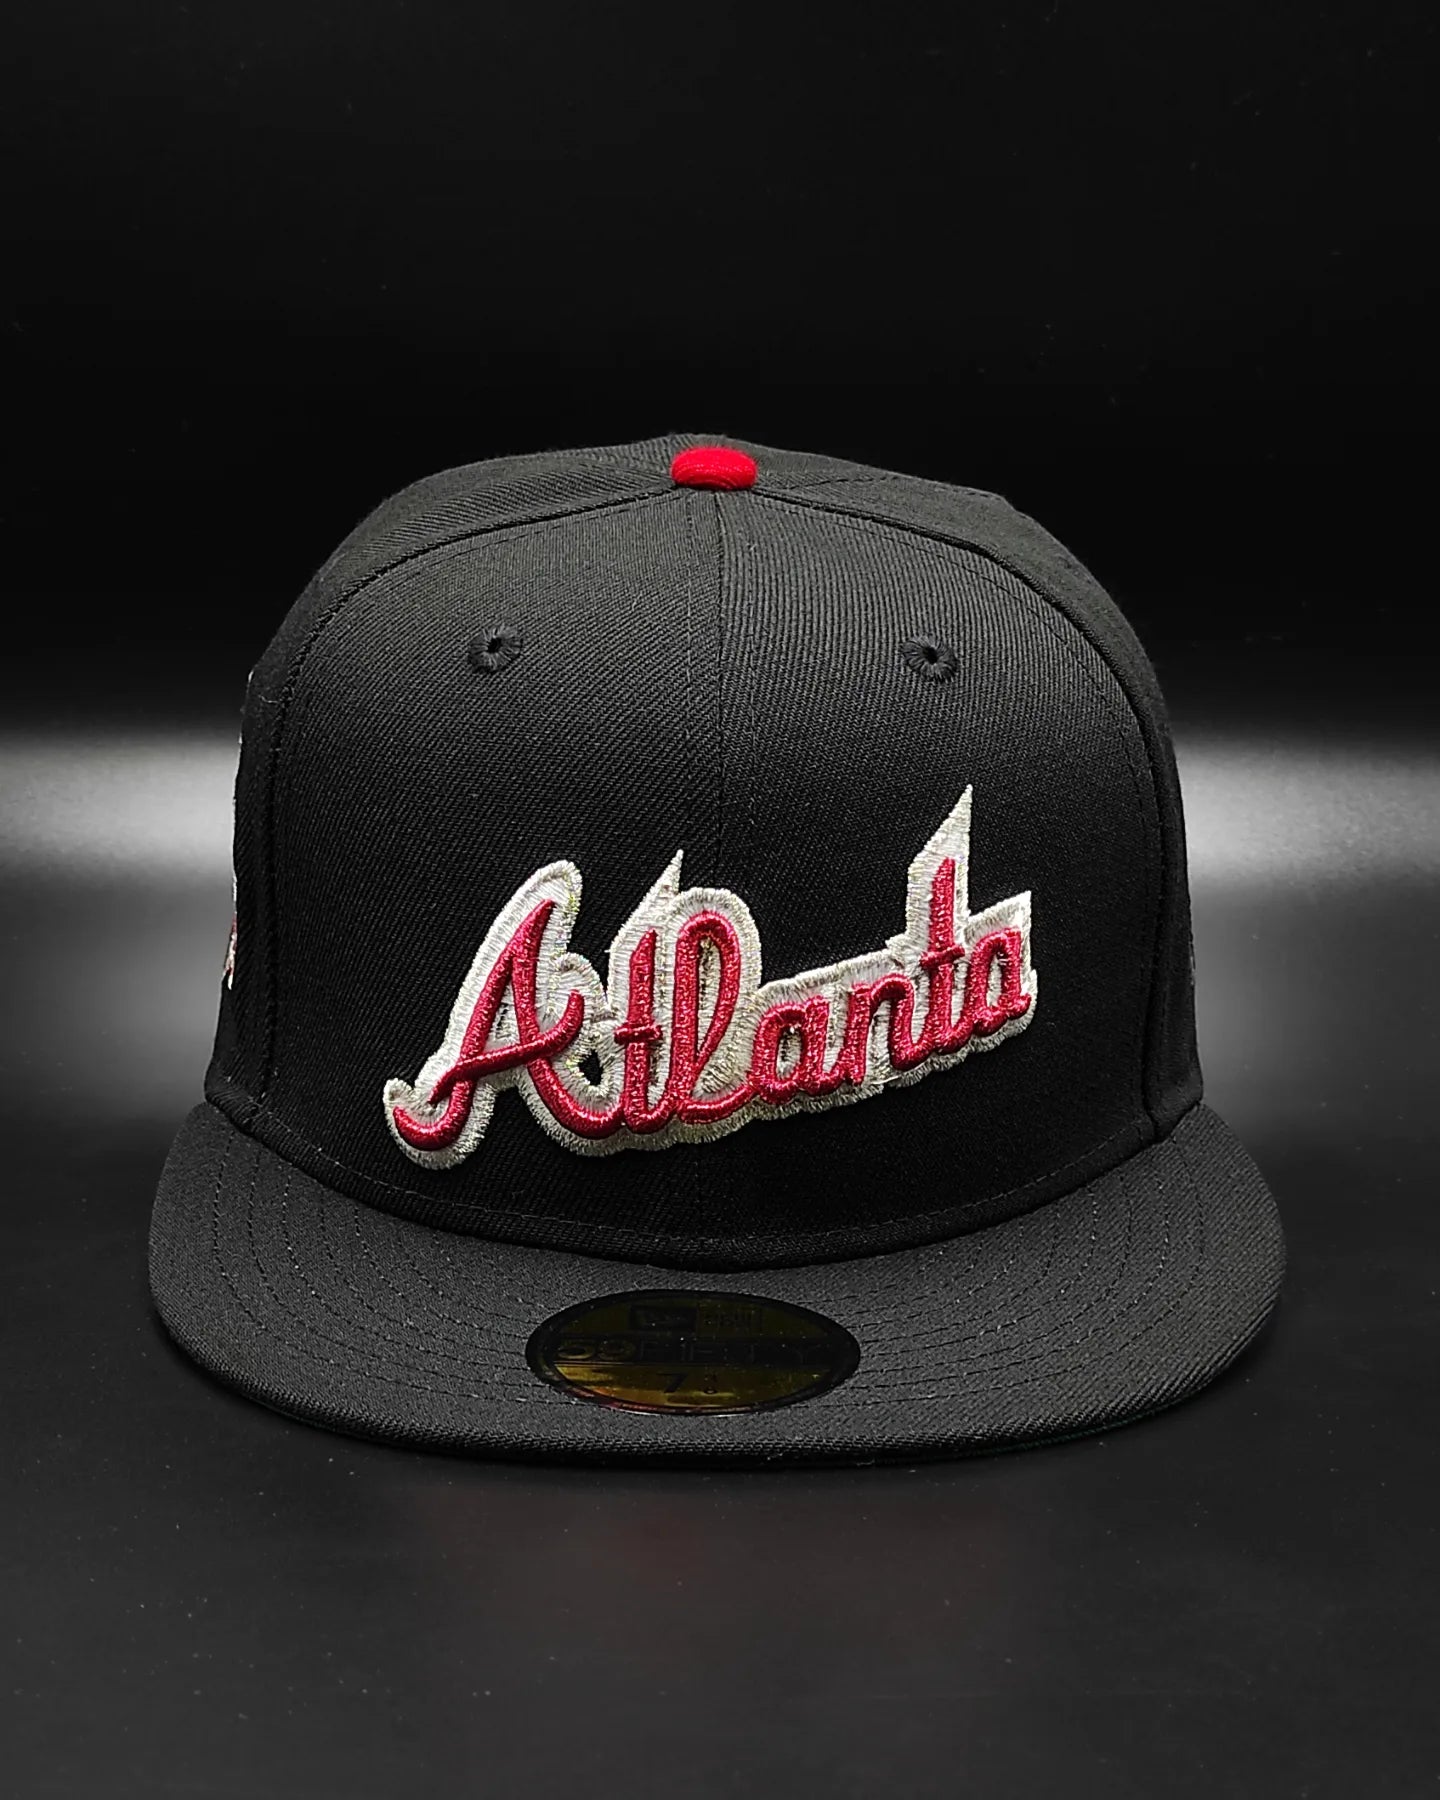 New Era Atlanta braves 150th anniversary black dome metallic edition 59fifty fitted hat